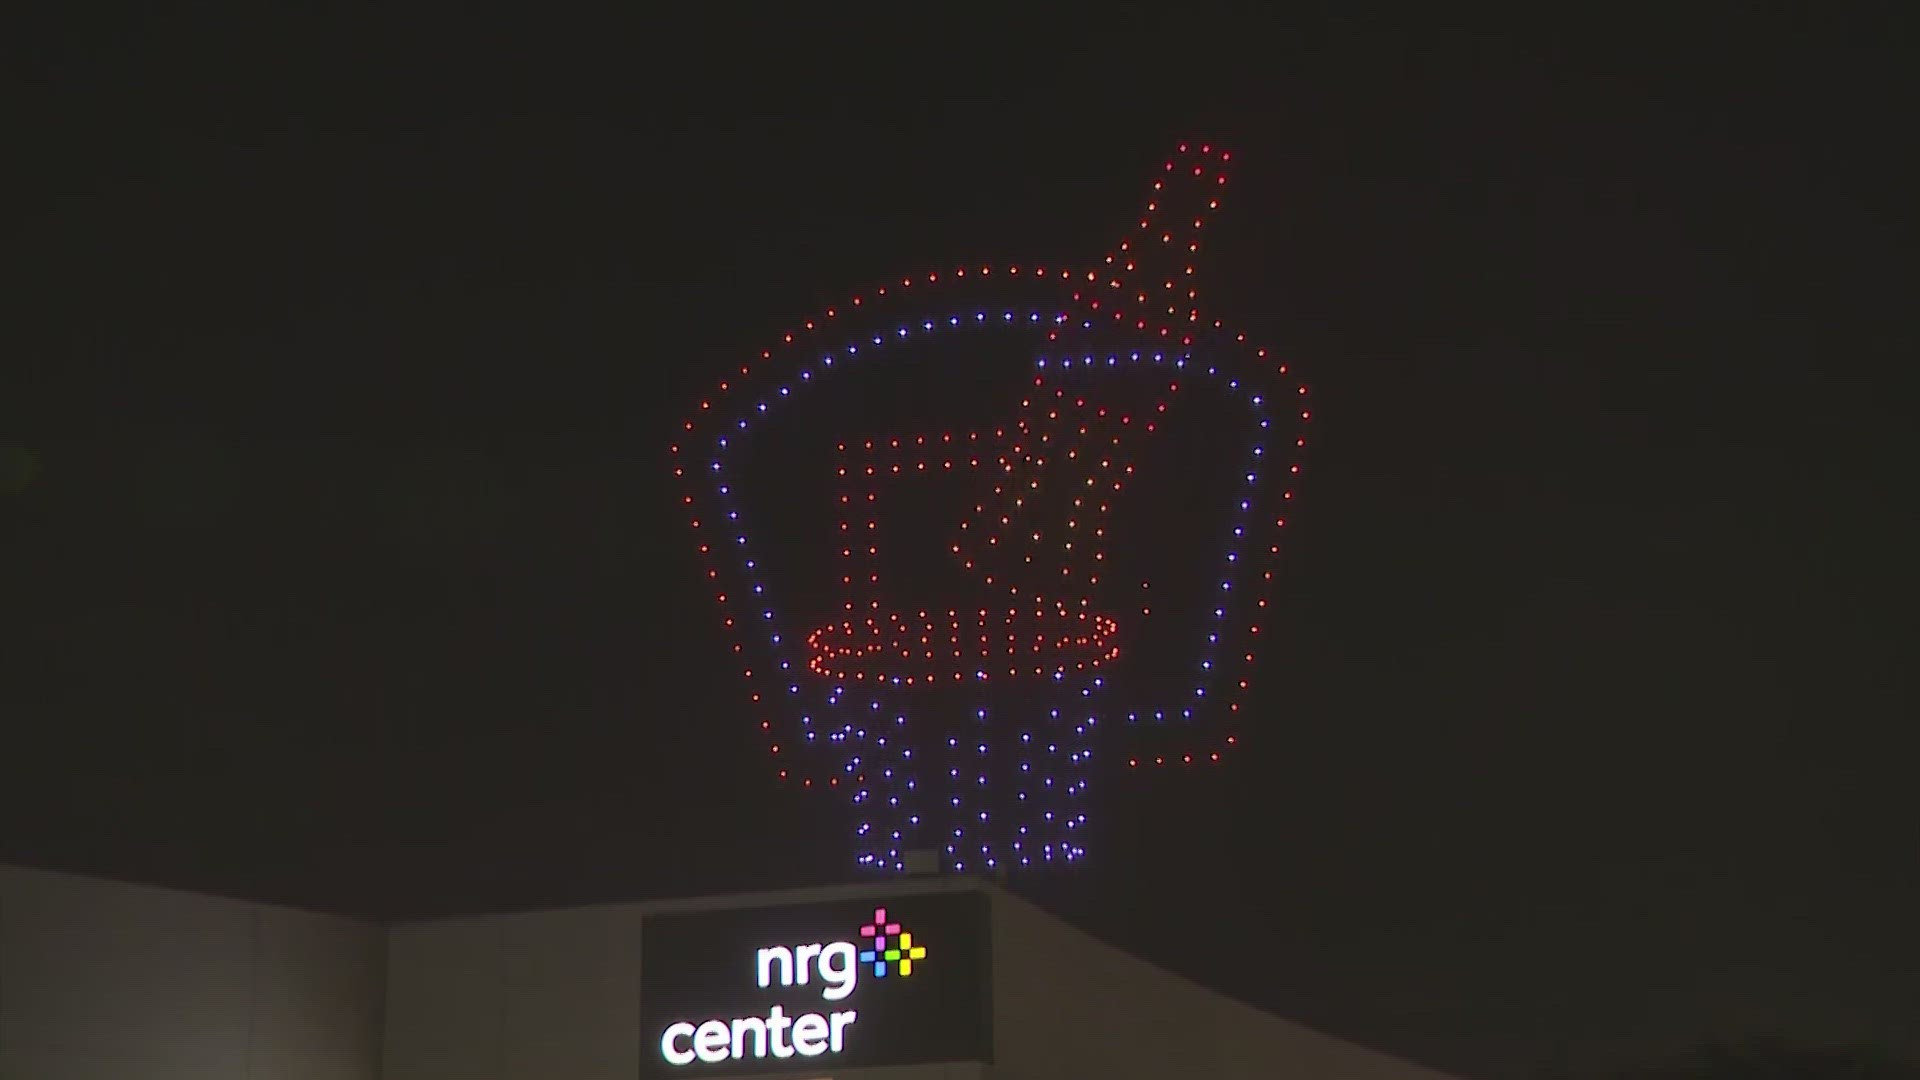 The drones were over NRG Stadium after the first two games of the Final Four on Saturday.